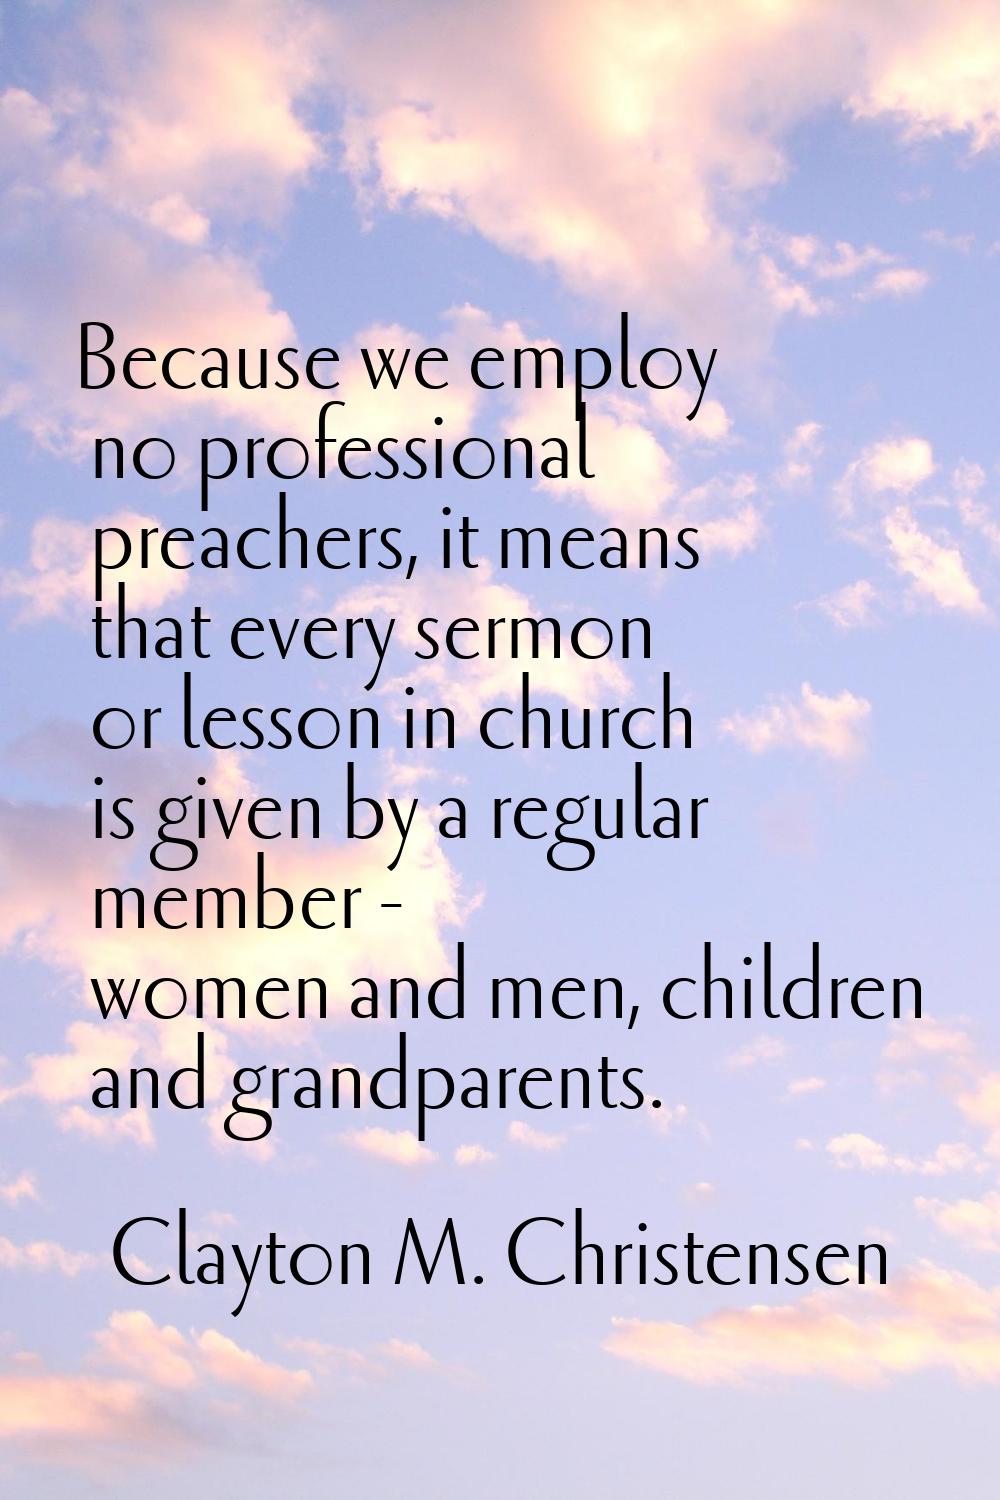 Because we employ no professional preachers, it means that every sermon or lesson in church is give